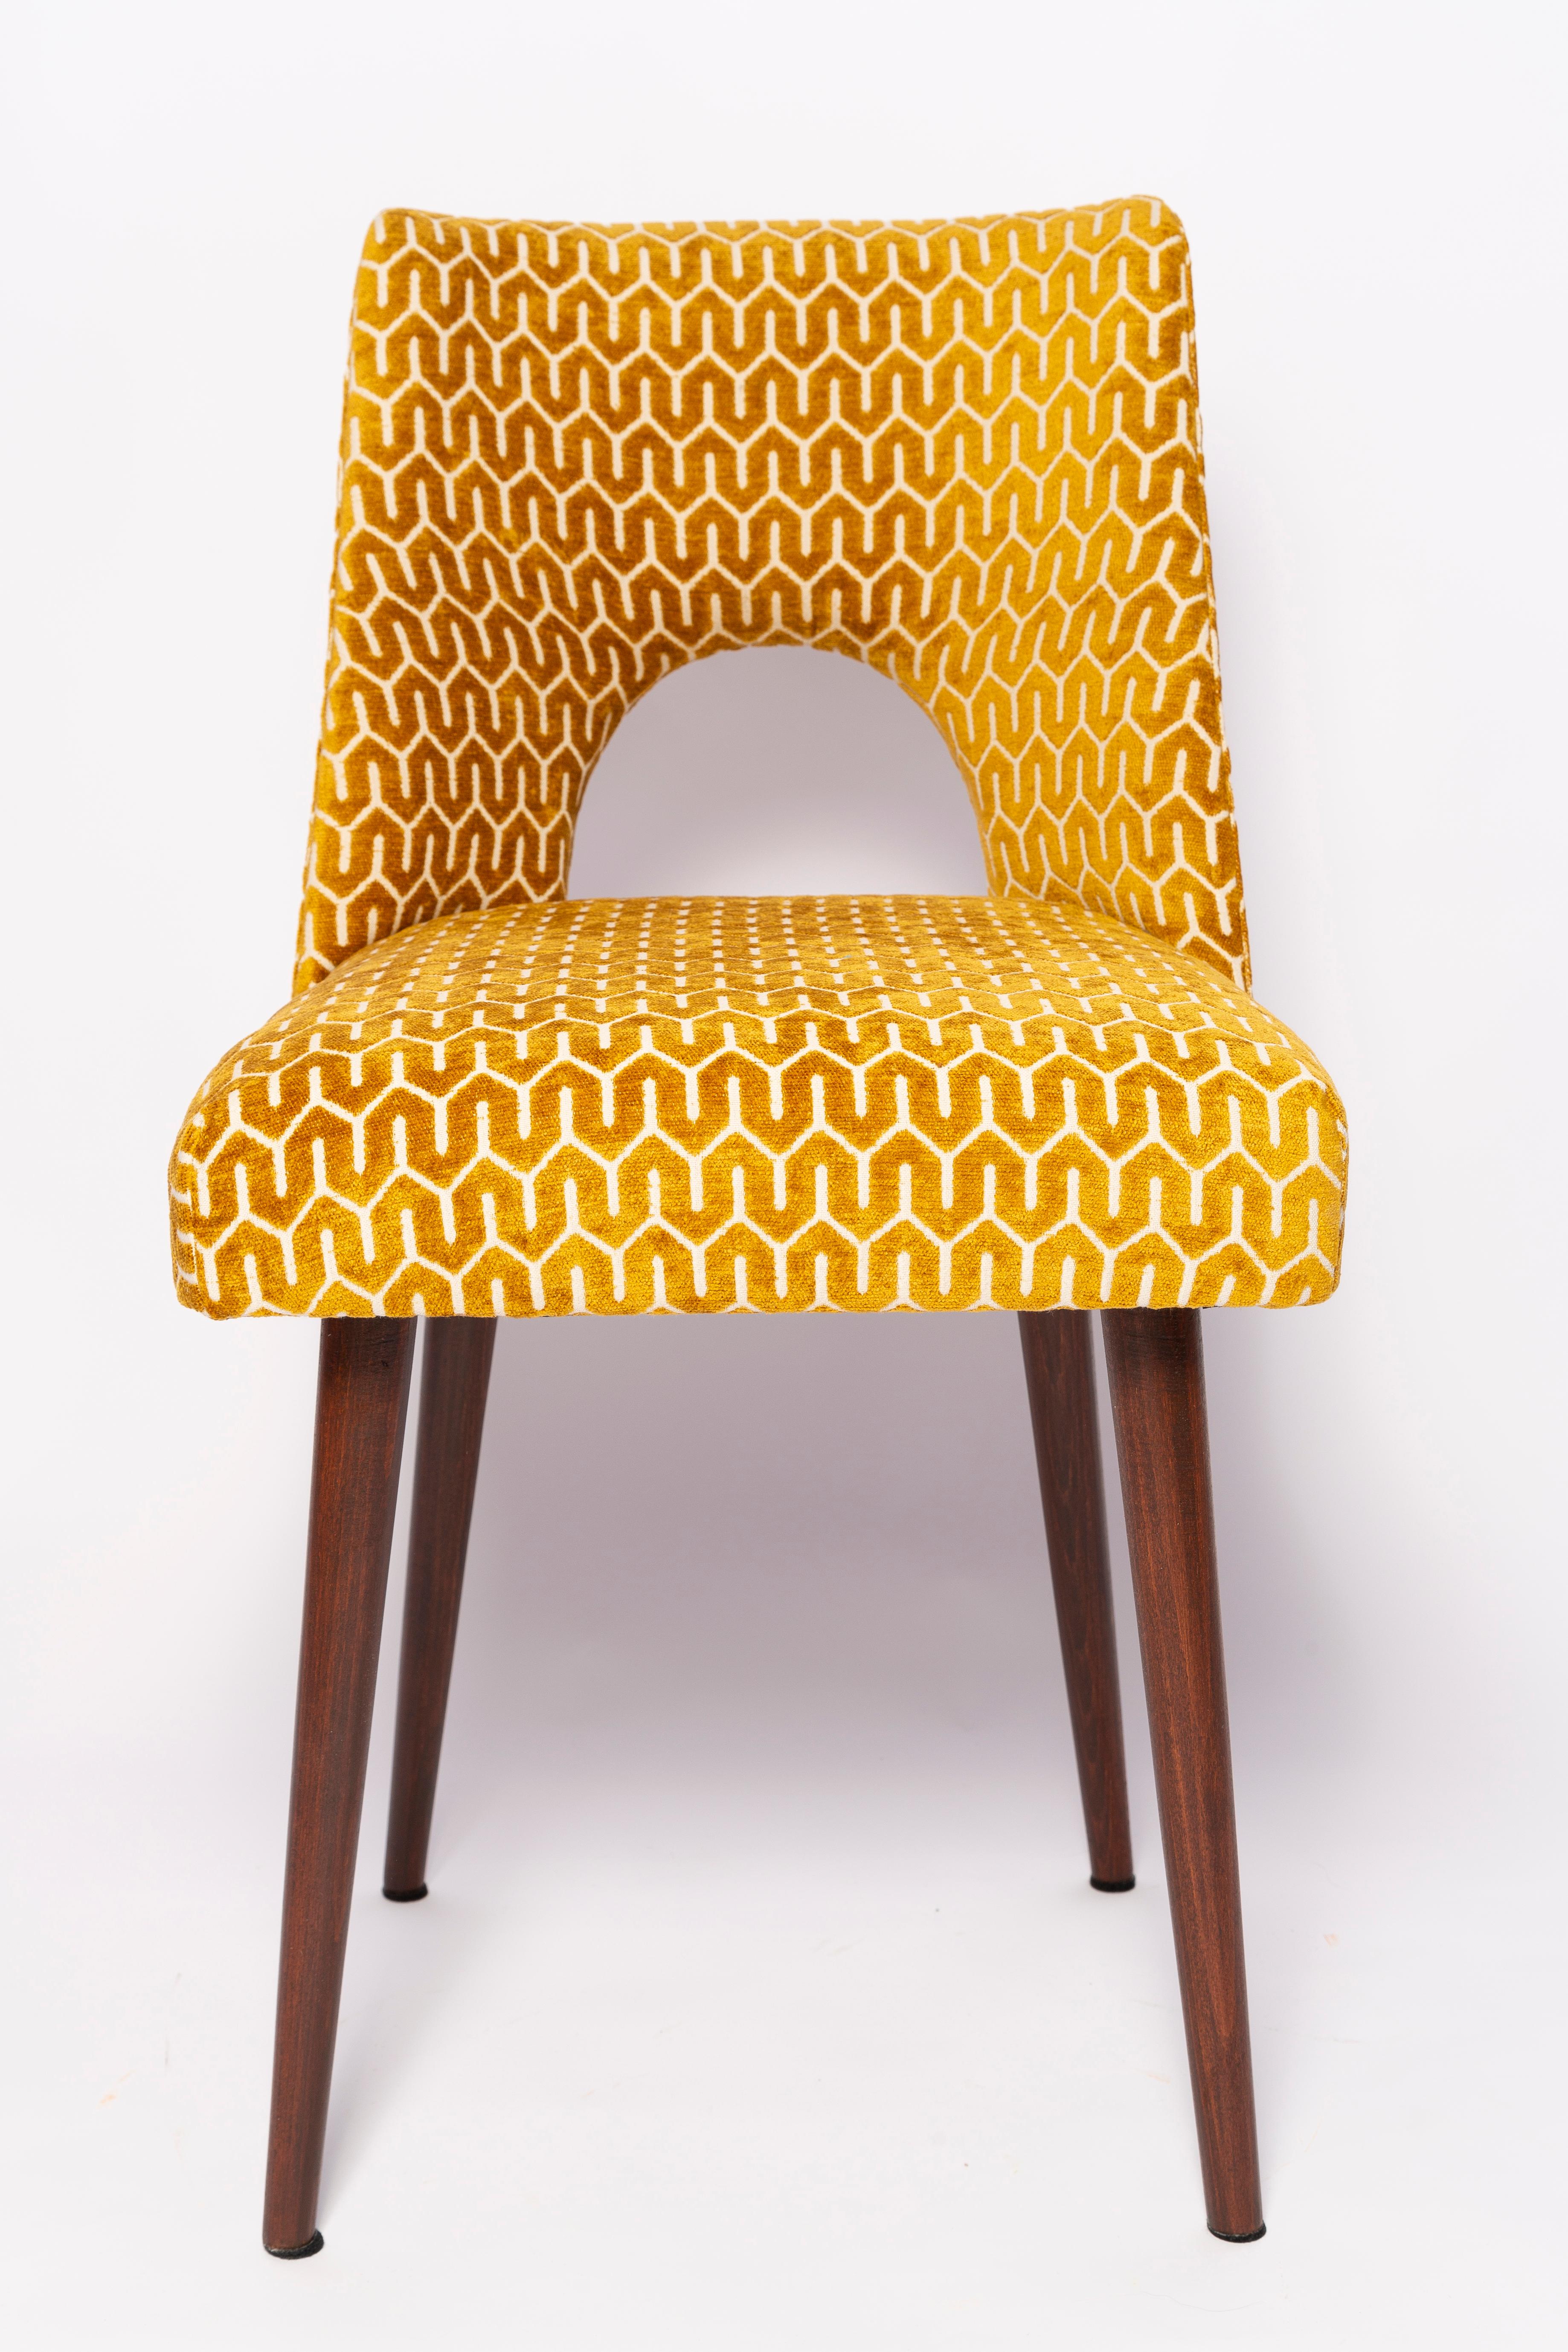 20th Century Mid-Century Yellow Mustard 'Shell' Chair, Europe, 1960s For Sale